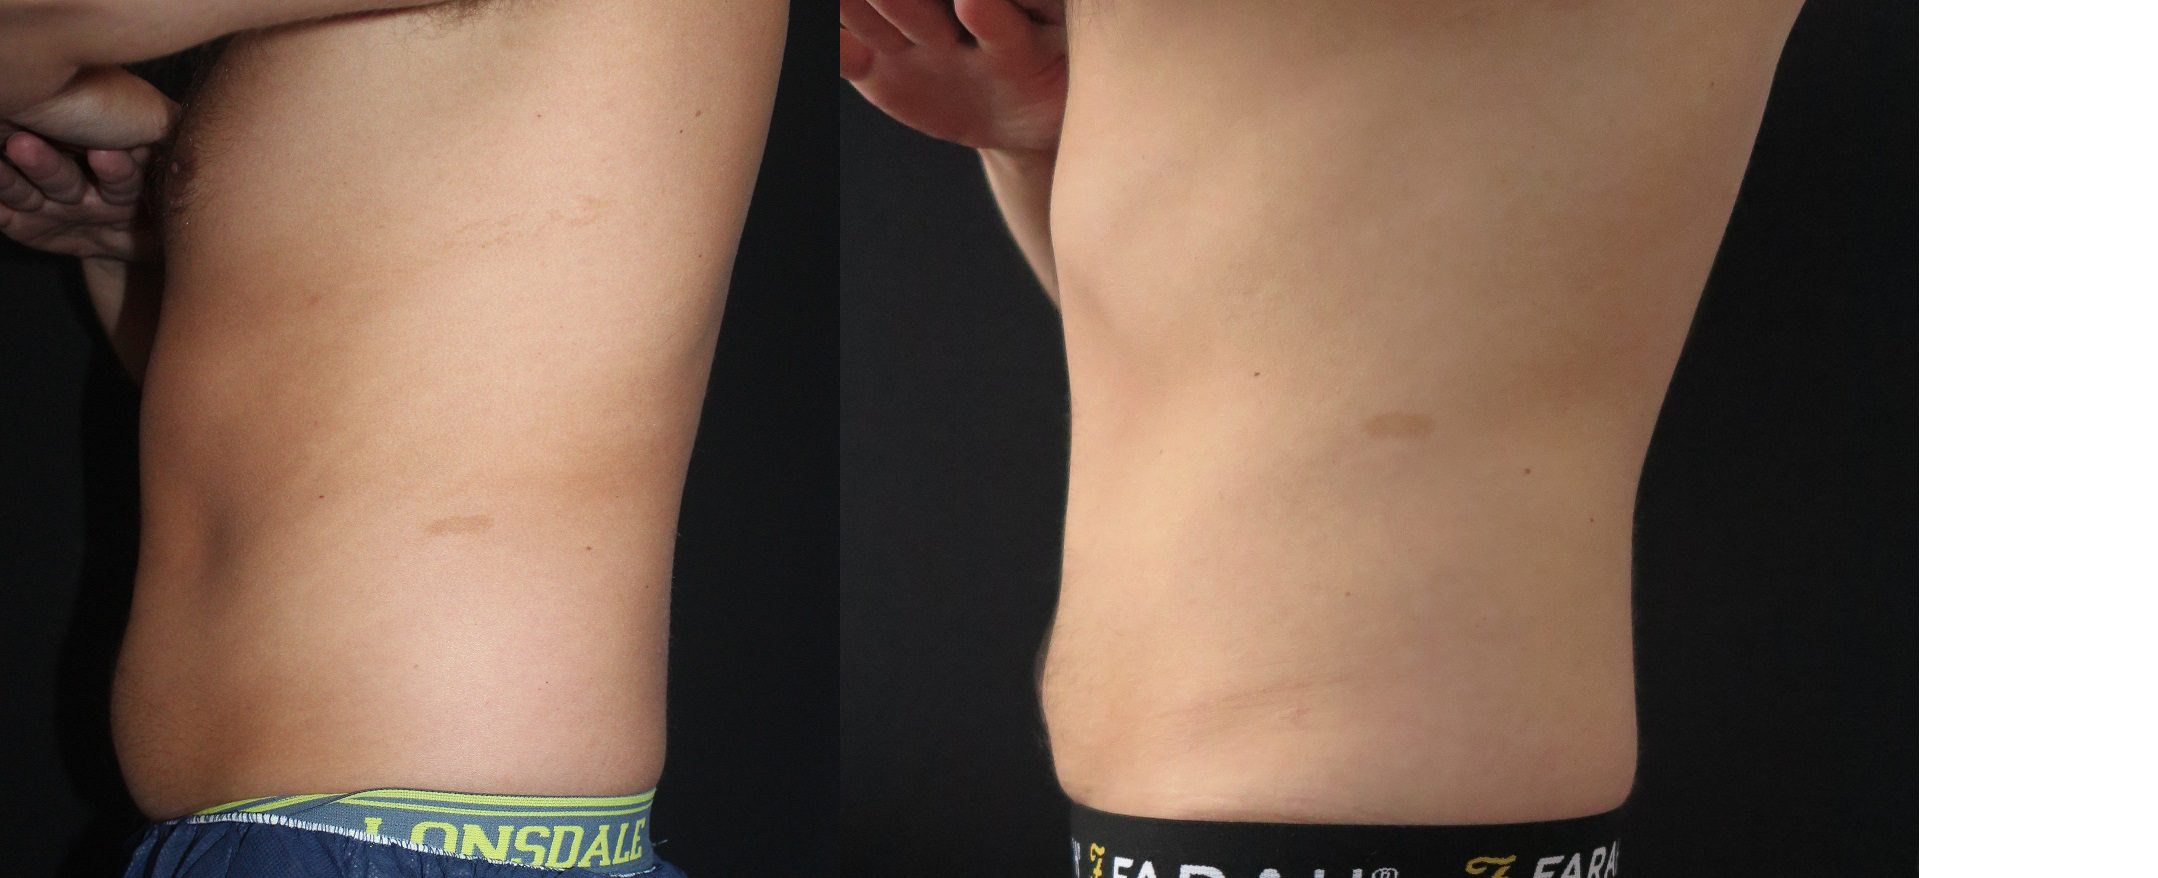 CoolSculpting stubborn belly fat before and after